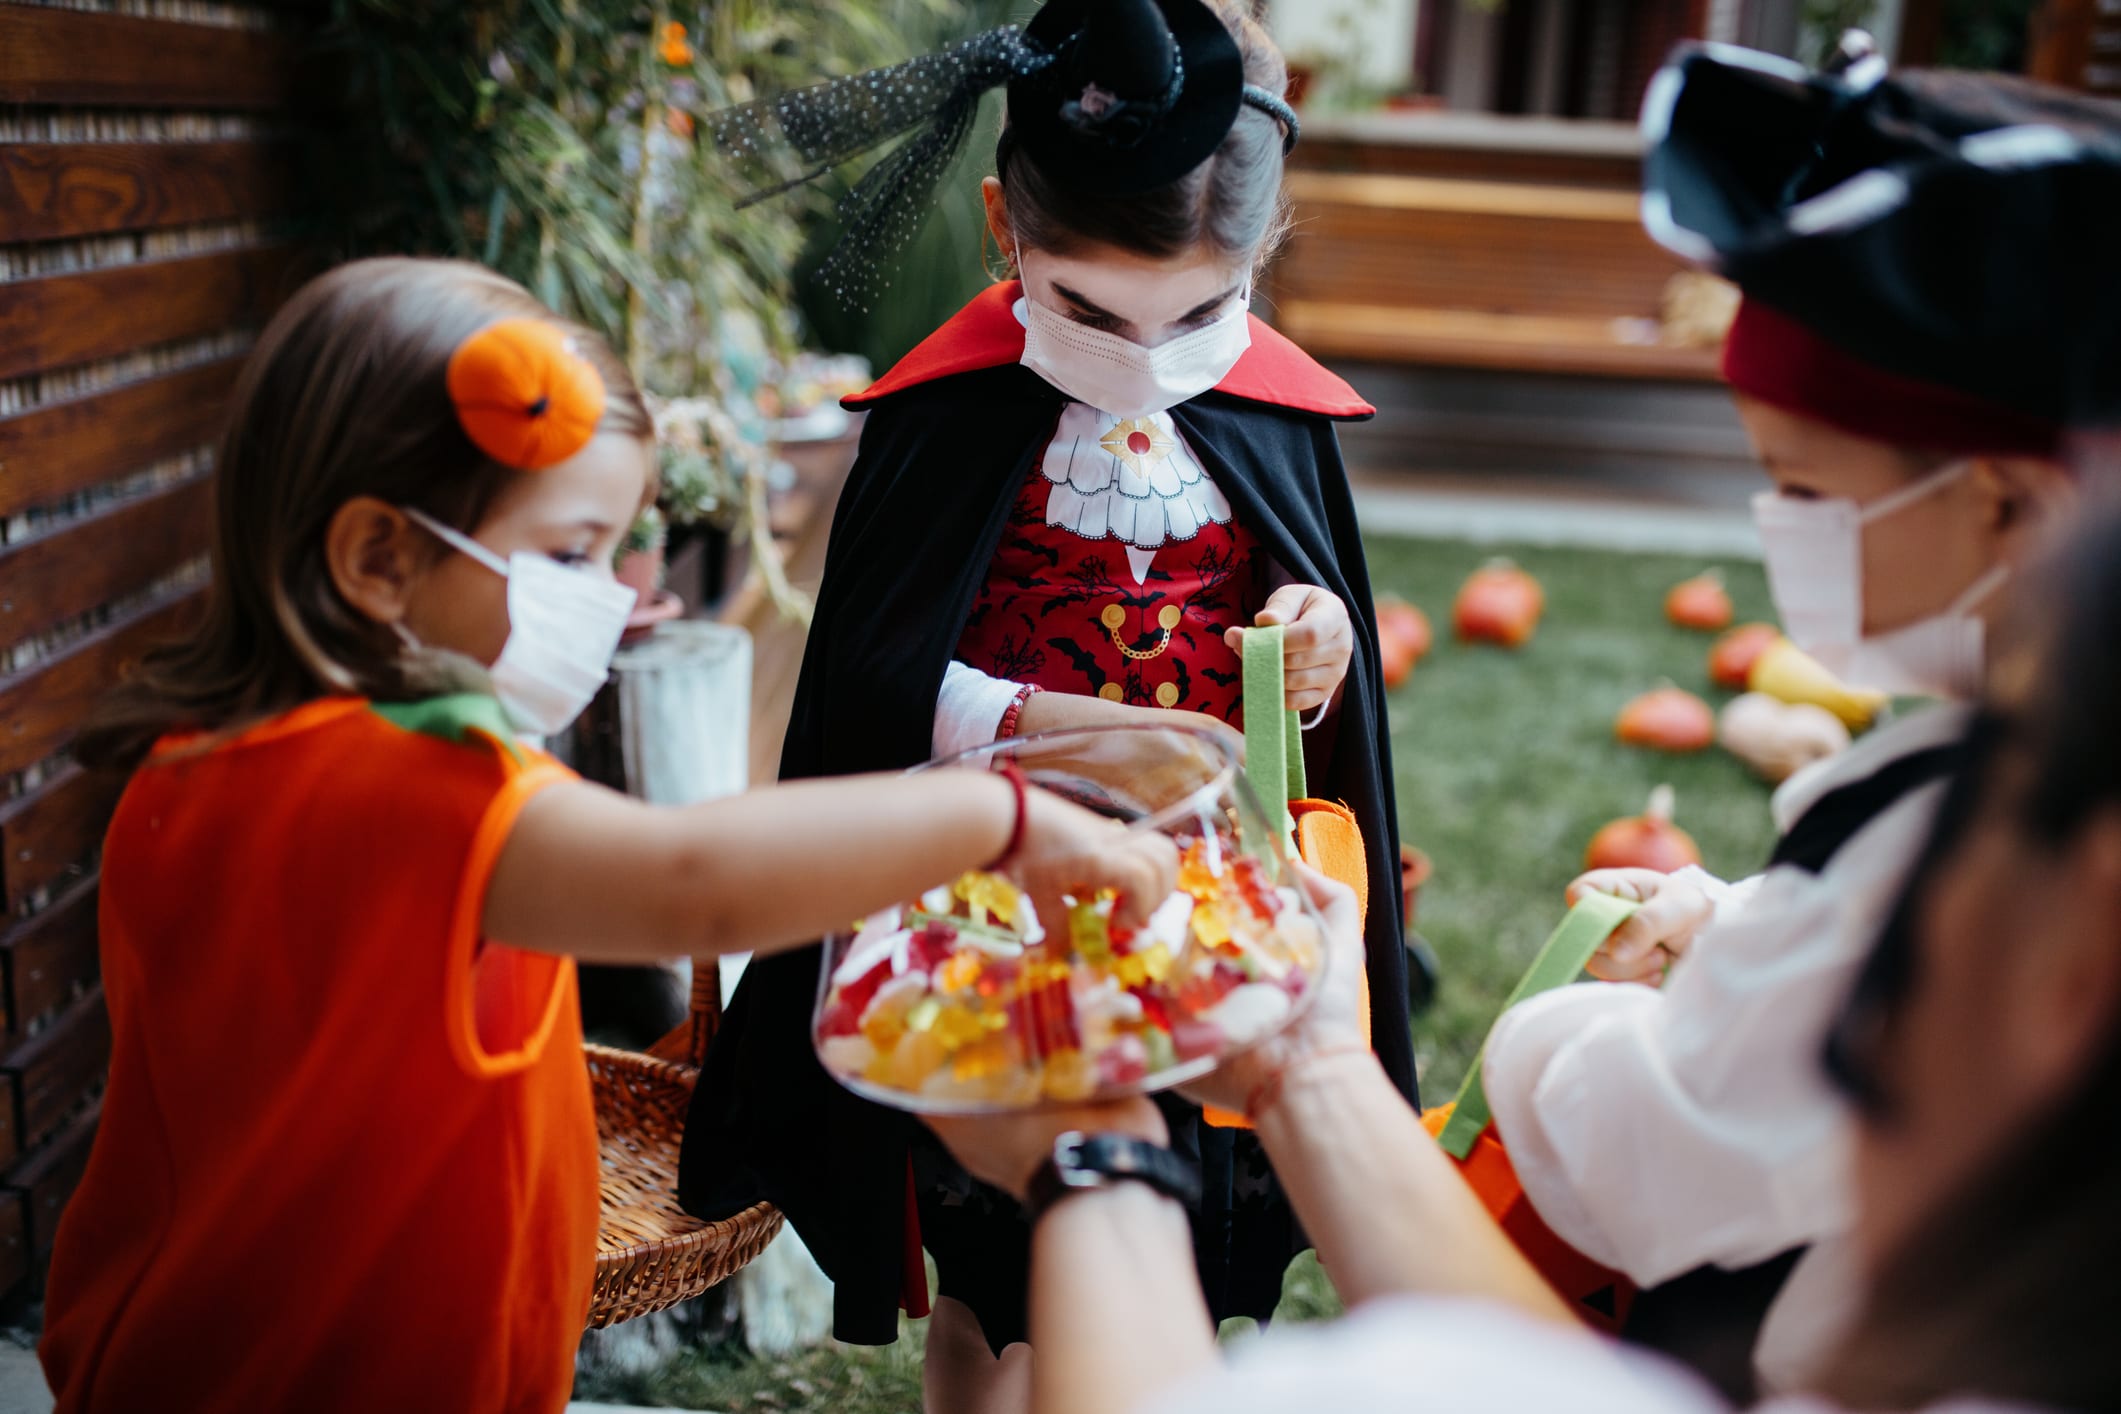 20 medical specialists with youngsters speak about Halloween plans.